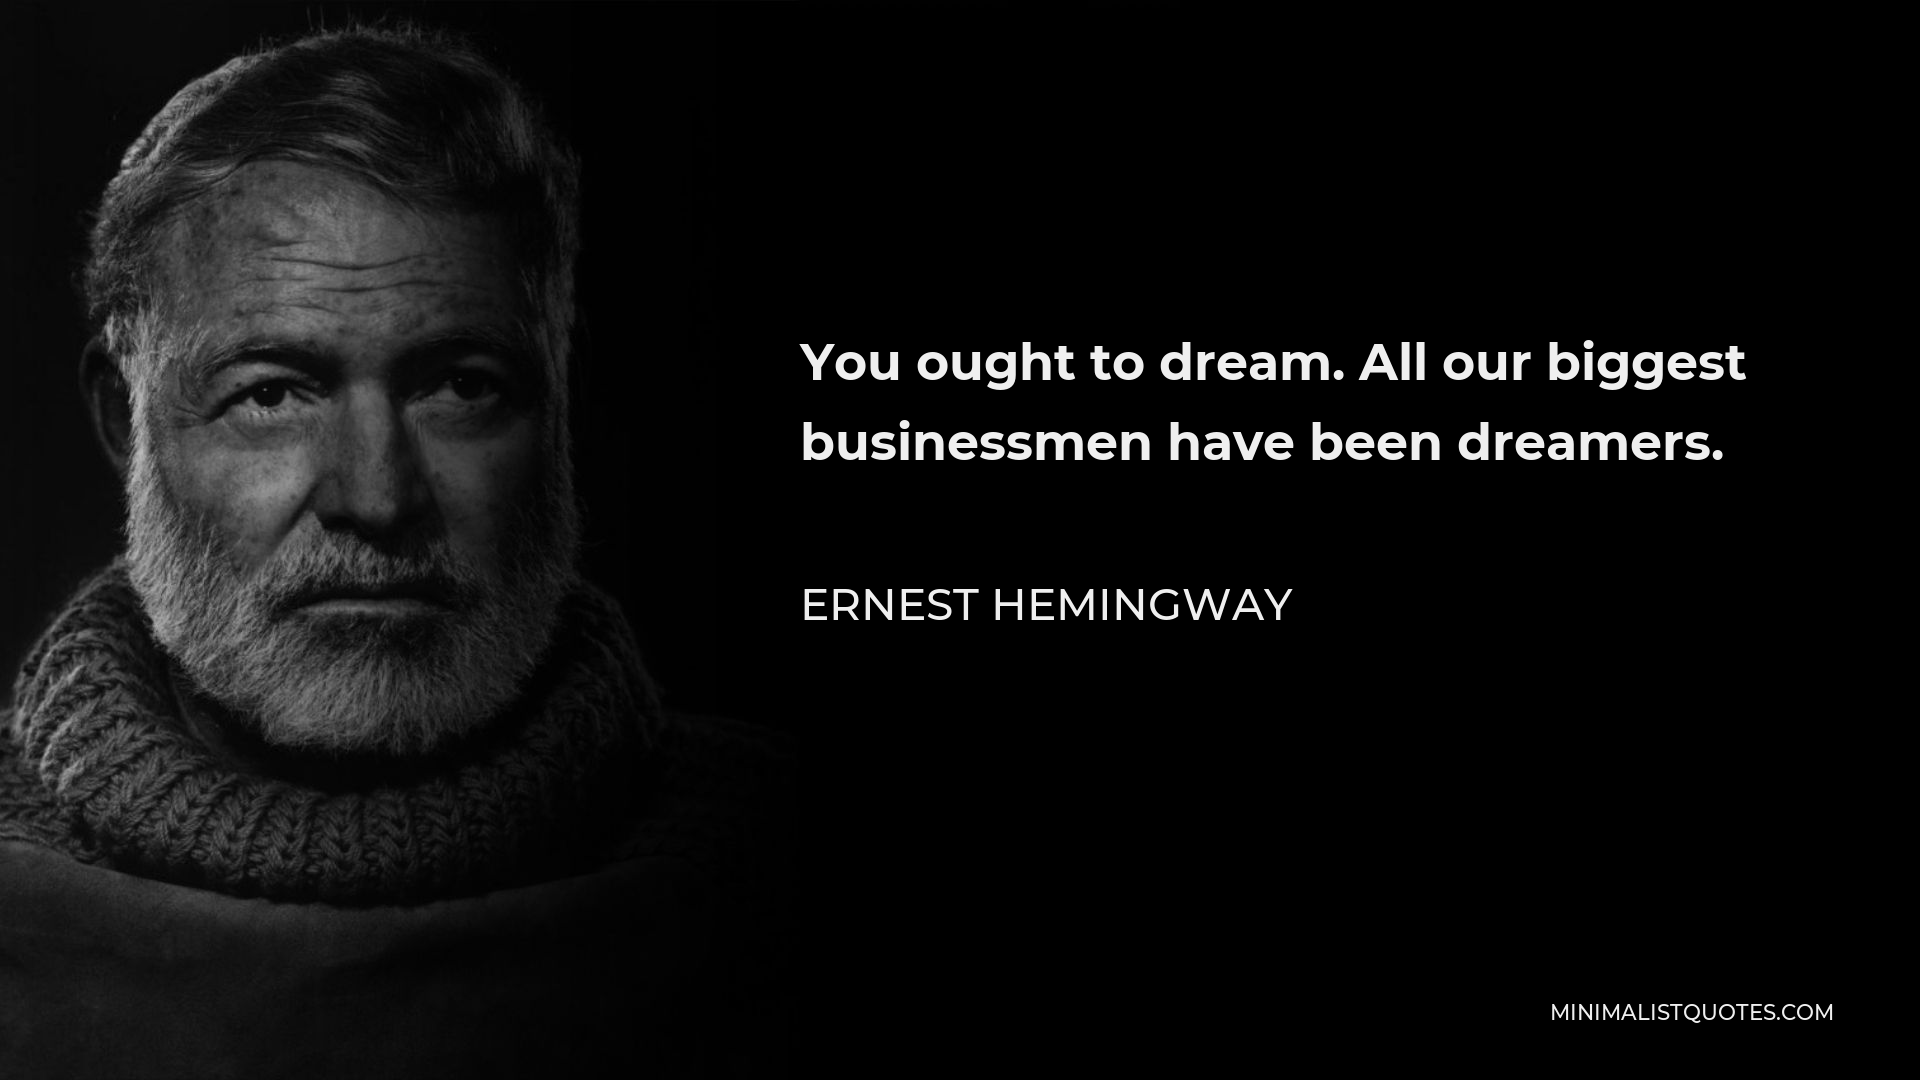 Ernest Hemingway Quote - You ought to dream. All our biggest businessmen have been dreamers.